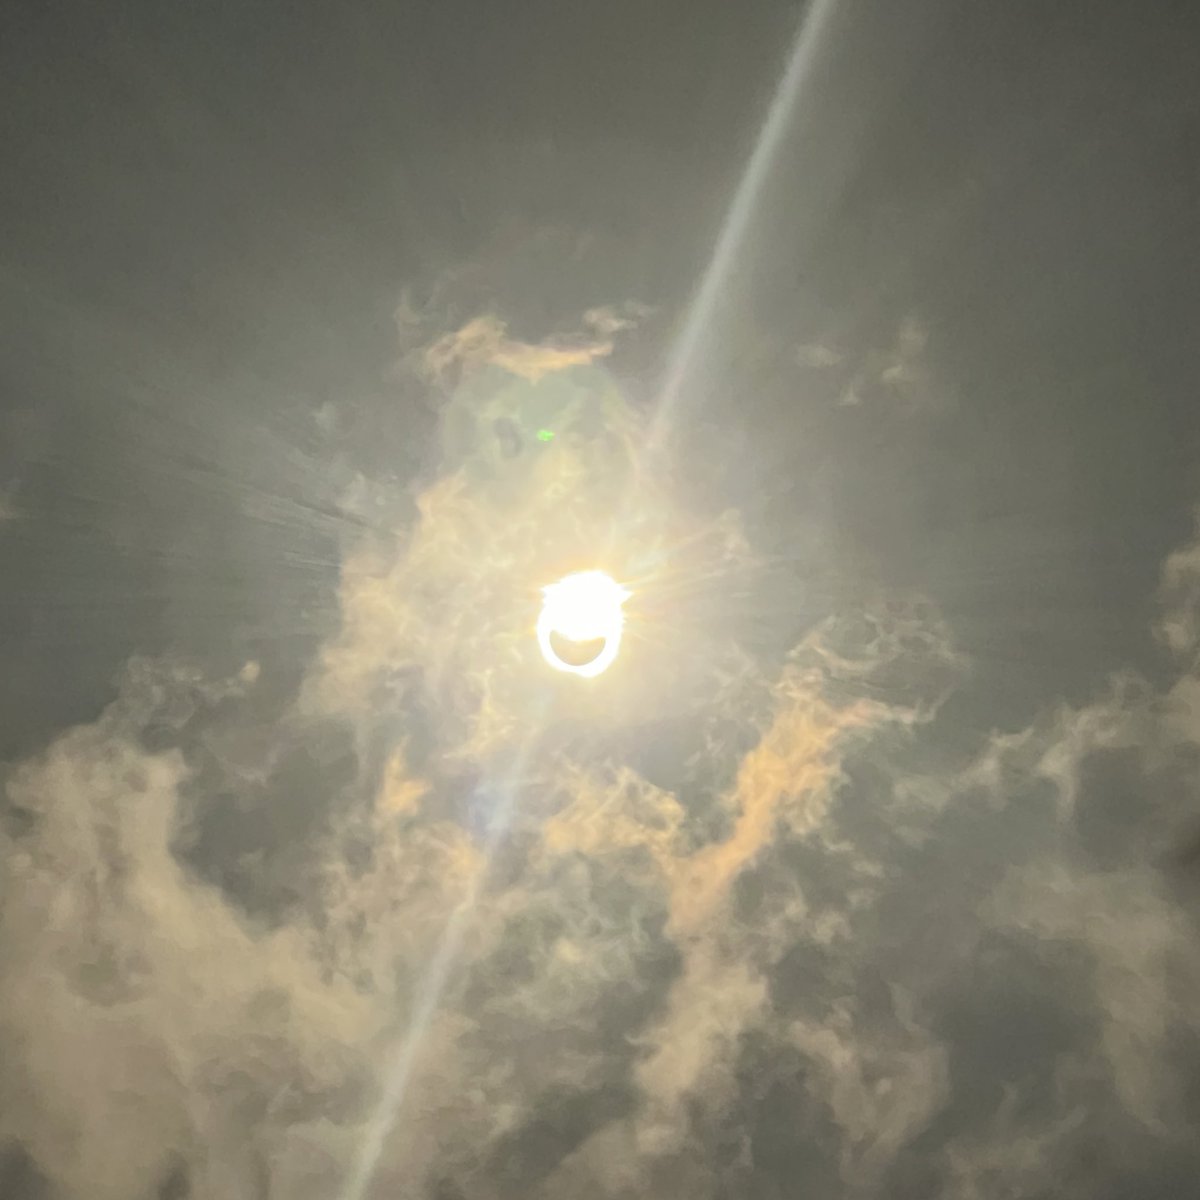 This picture I got of the eclipse is pretty nice ngl.